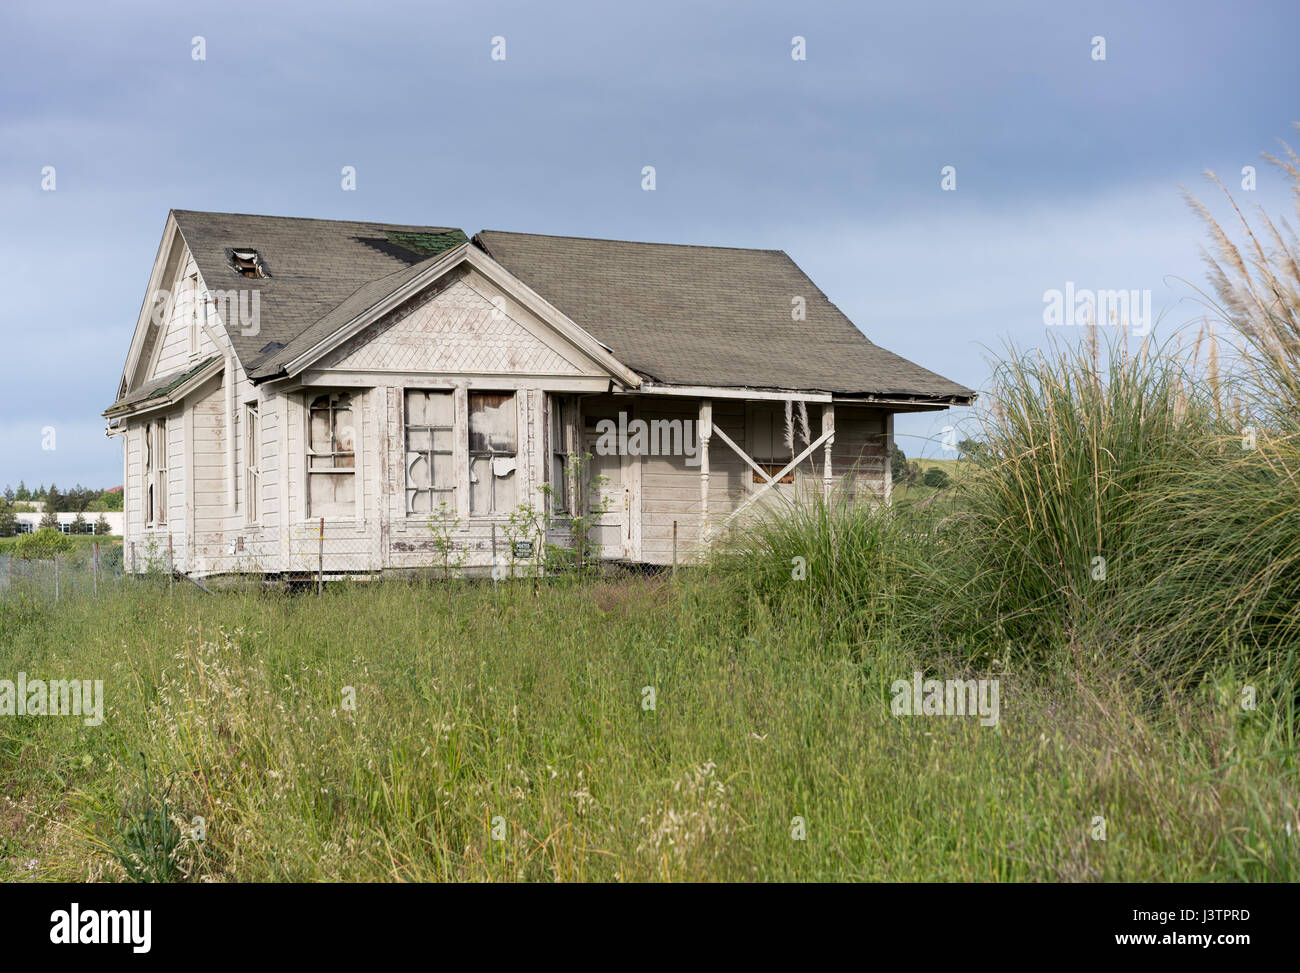 Abandoned single family home with wooden siding as fixer upper property Stock Photo